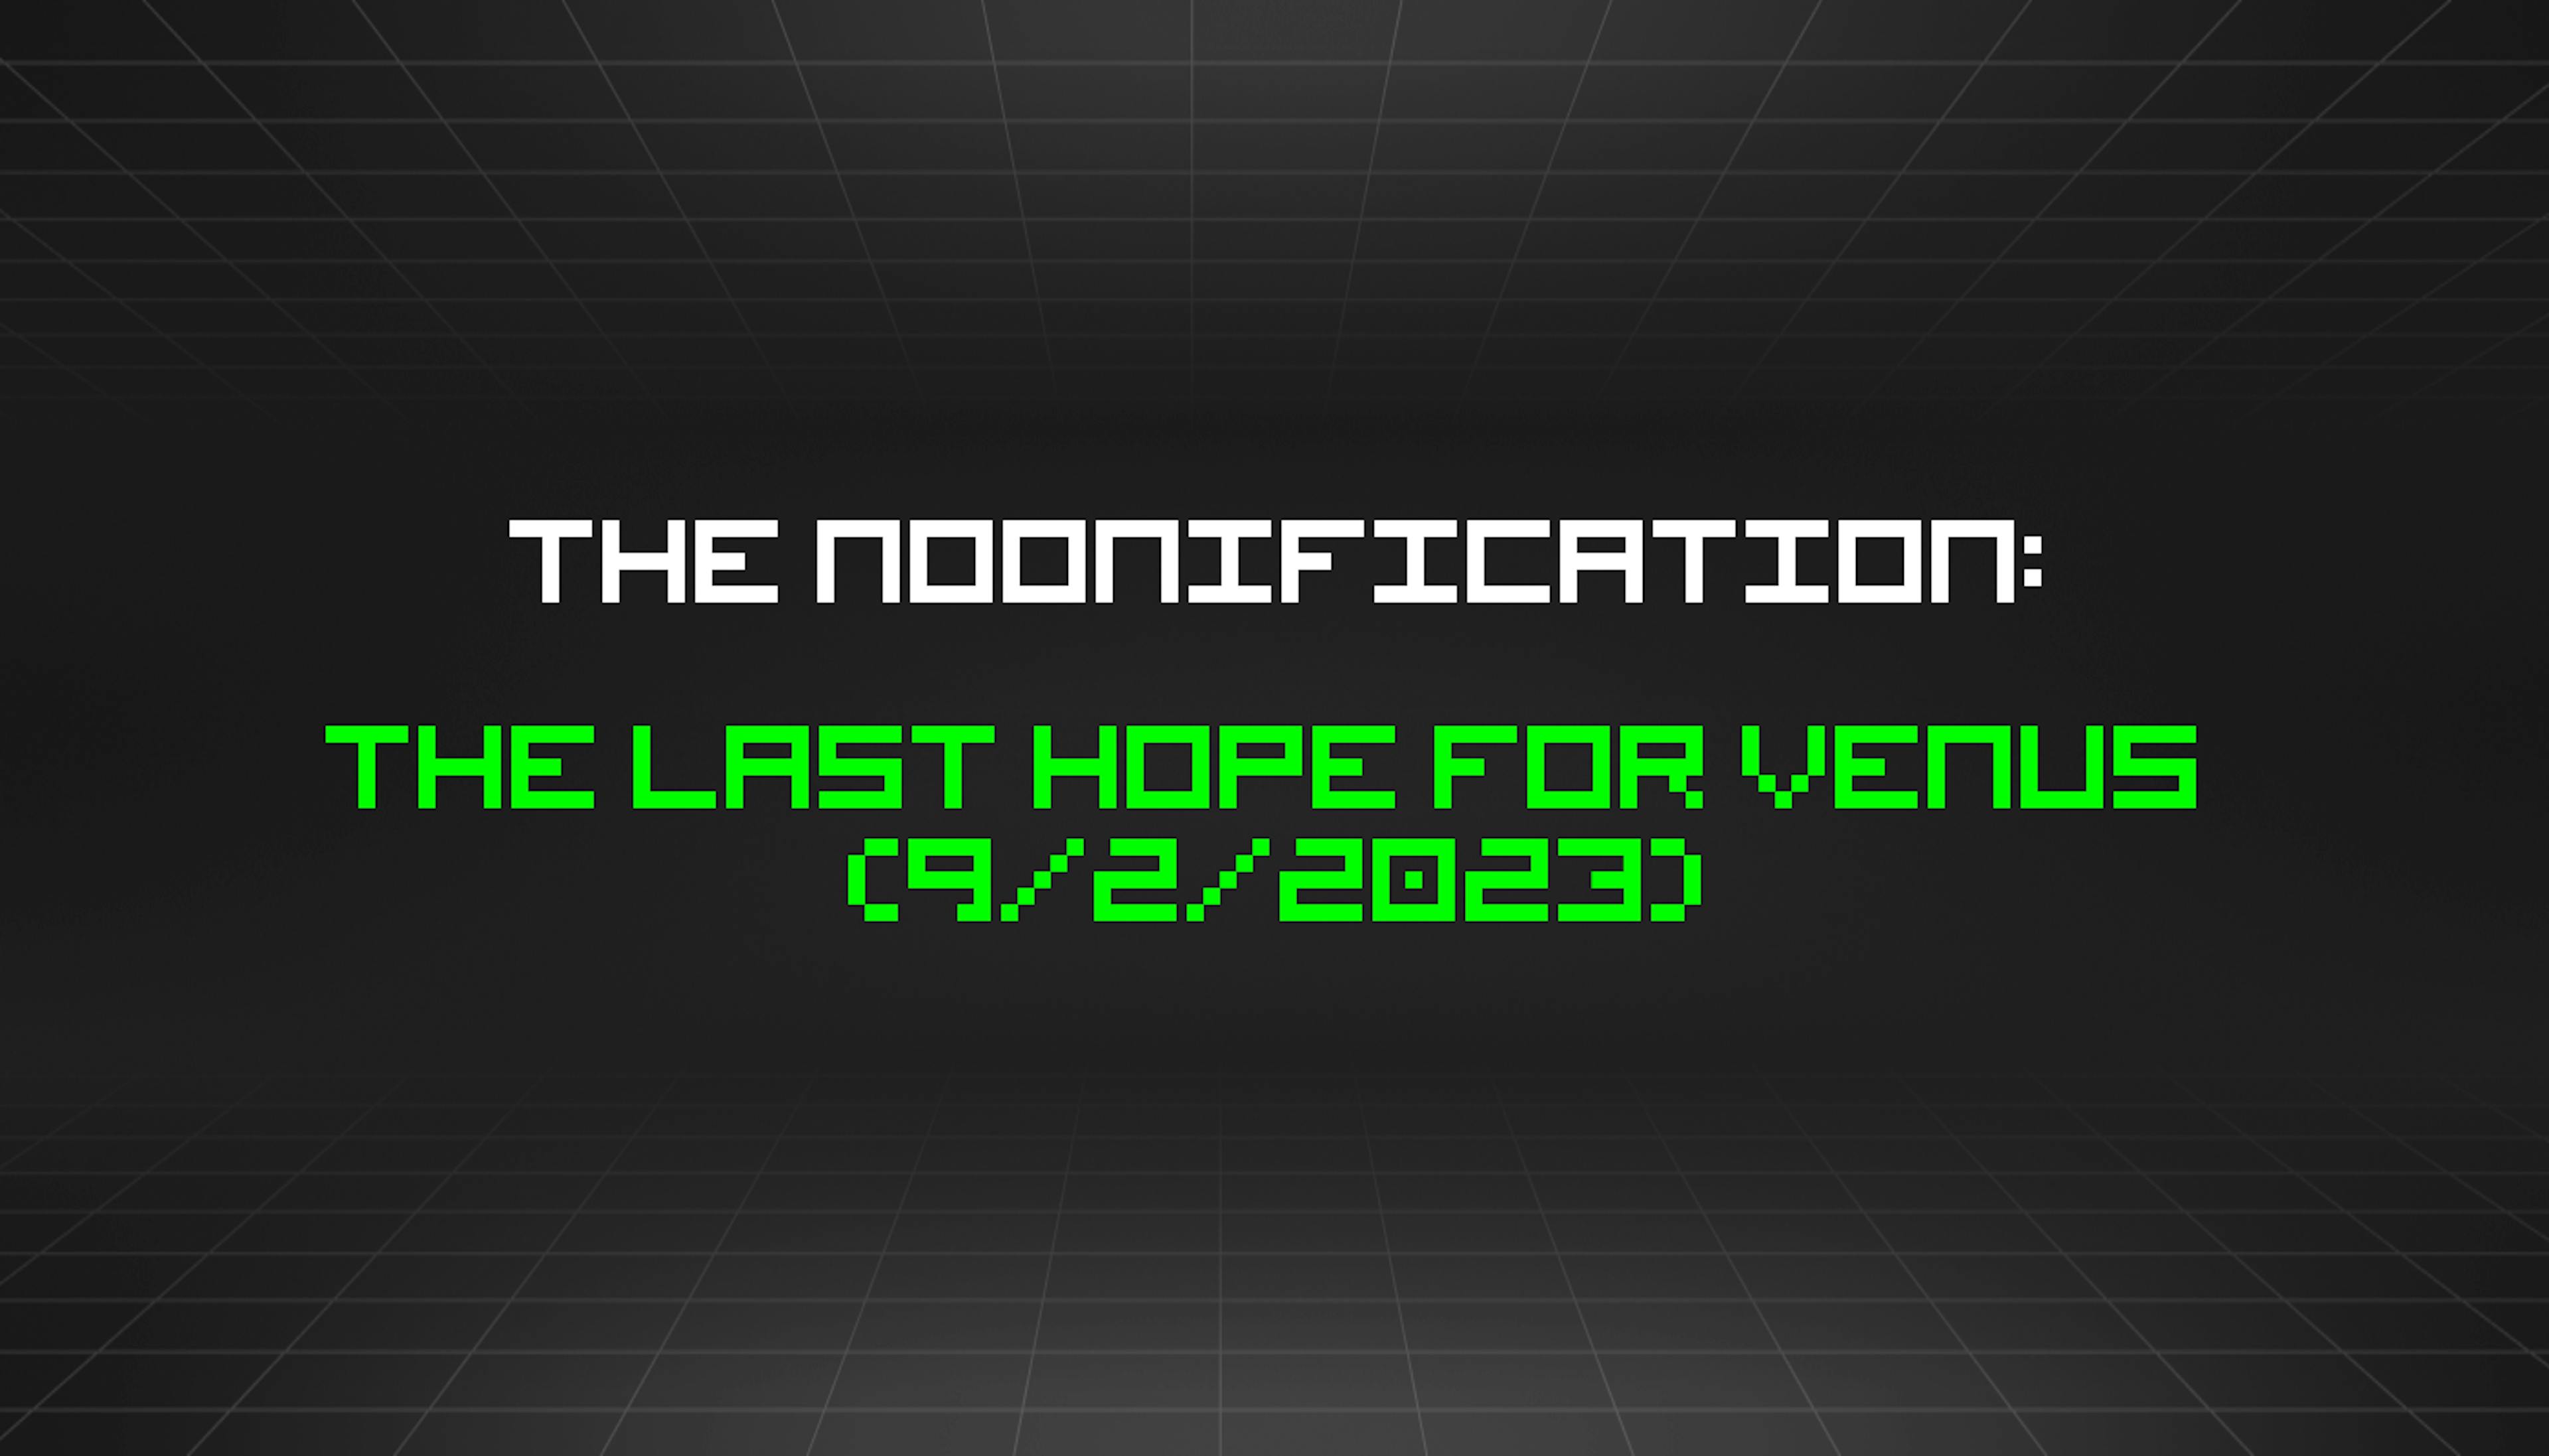 /9-2-2023-noonification feature image